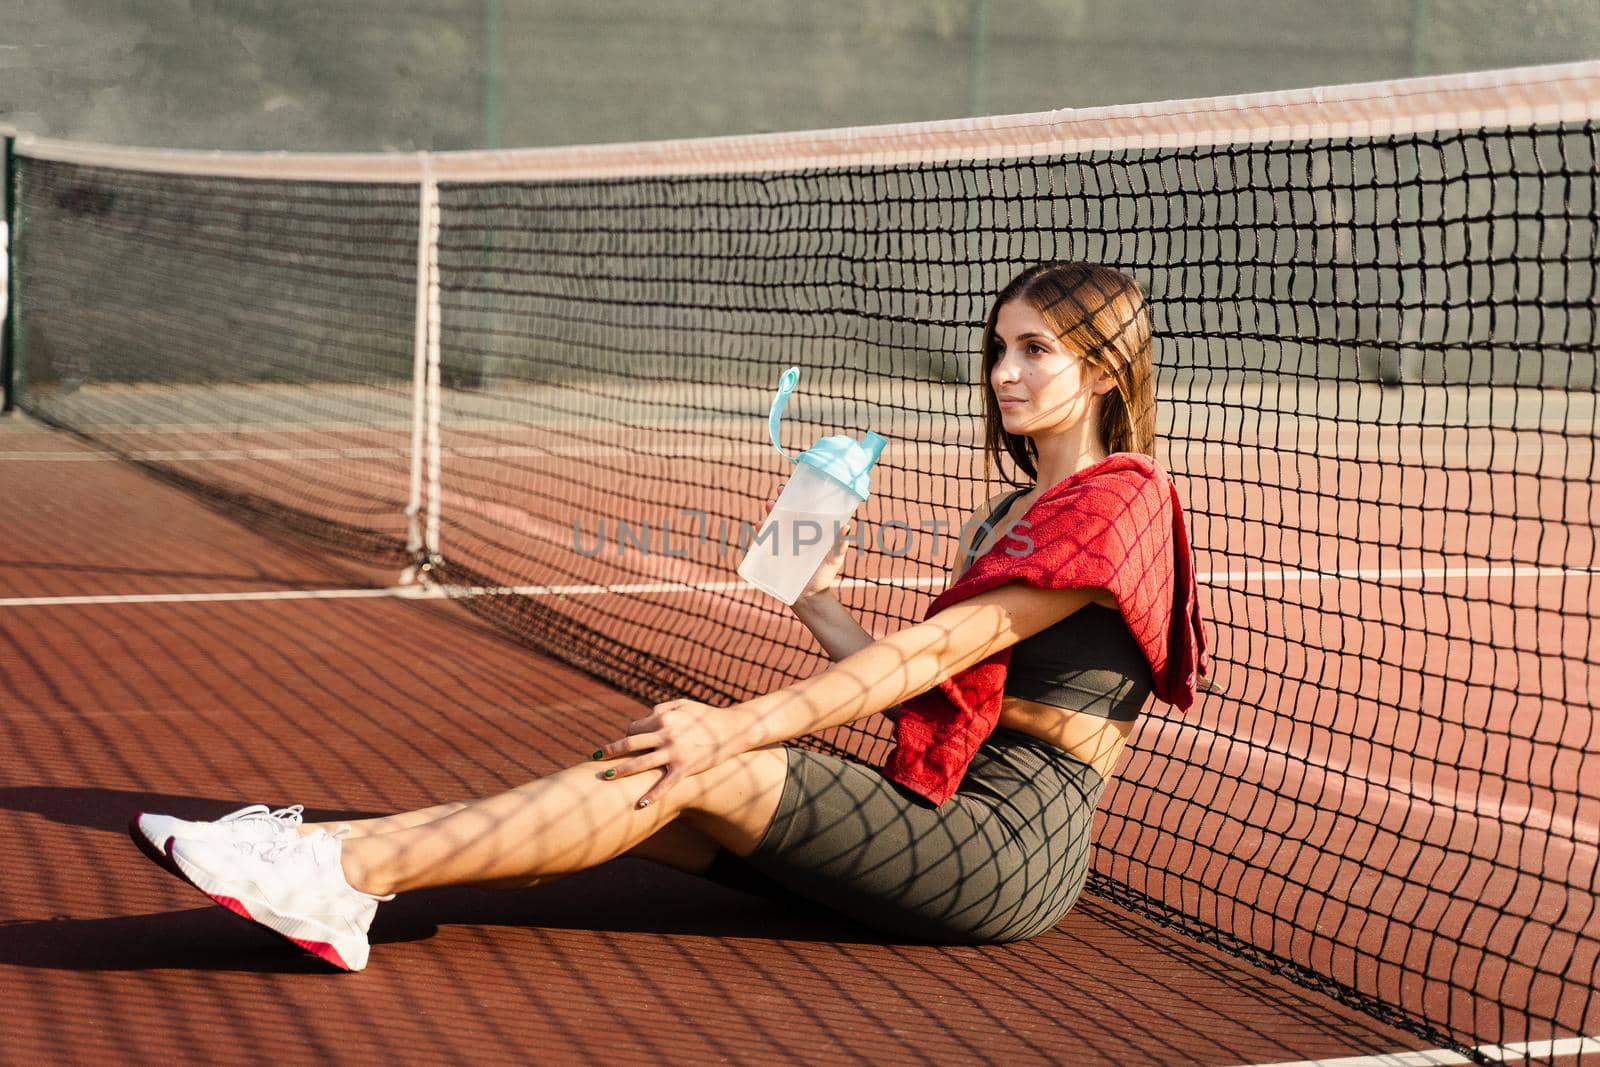 Athletic fit Asian girl drinking water from a bottle. Rest after training on the tennis court. by Rabizo